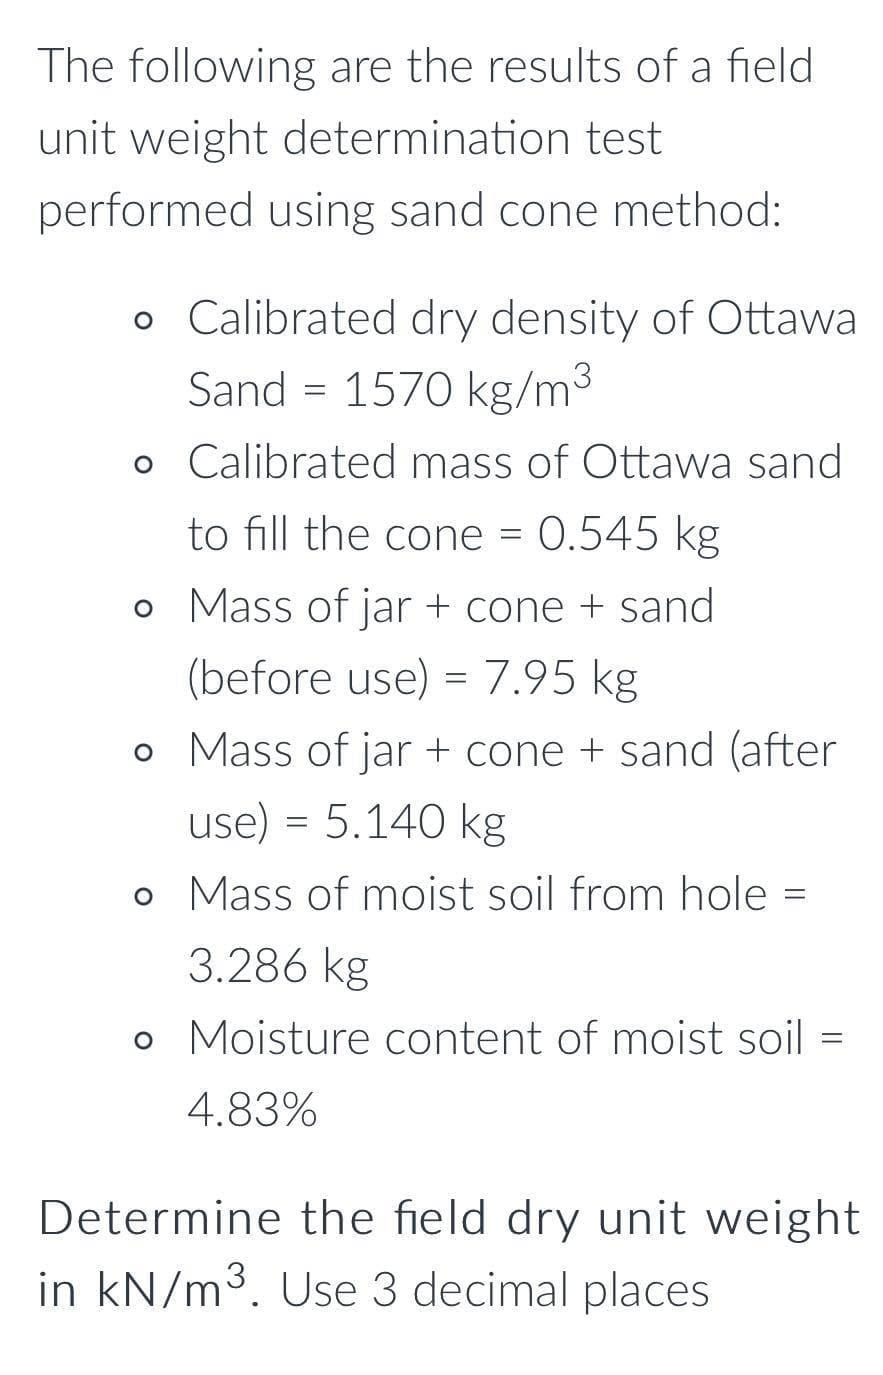 The following are the results of a field
unit weight determination test
performed using sand cone method:
o Calibrated dry density of Ottawa
Sand = 1570 kg/m3
o Calibrated mass of Ottawa sand
to fill the cone = 0.545 kg
o Mass of jar + cone + sand
(before use) = 7.95 kg
o Mass of jar + cone + sand (after
use) = 5.140 kg
o Mass of moist soil from hole =
3.286 kg
o Moisture content of moist soil =
4.83%
Determine the field dry unit weight
in kN/m3. Use 3 decimal places
